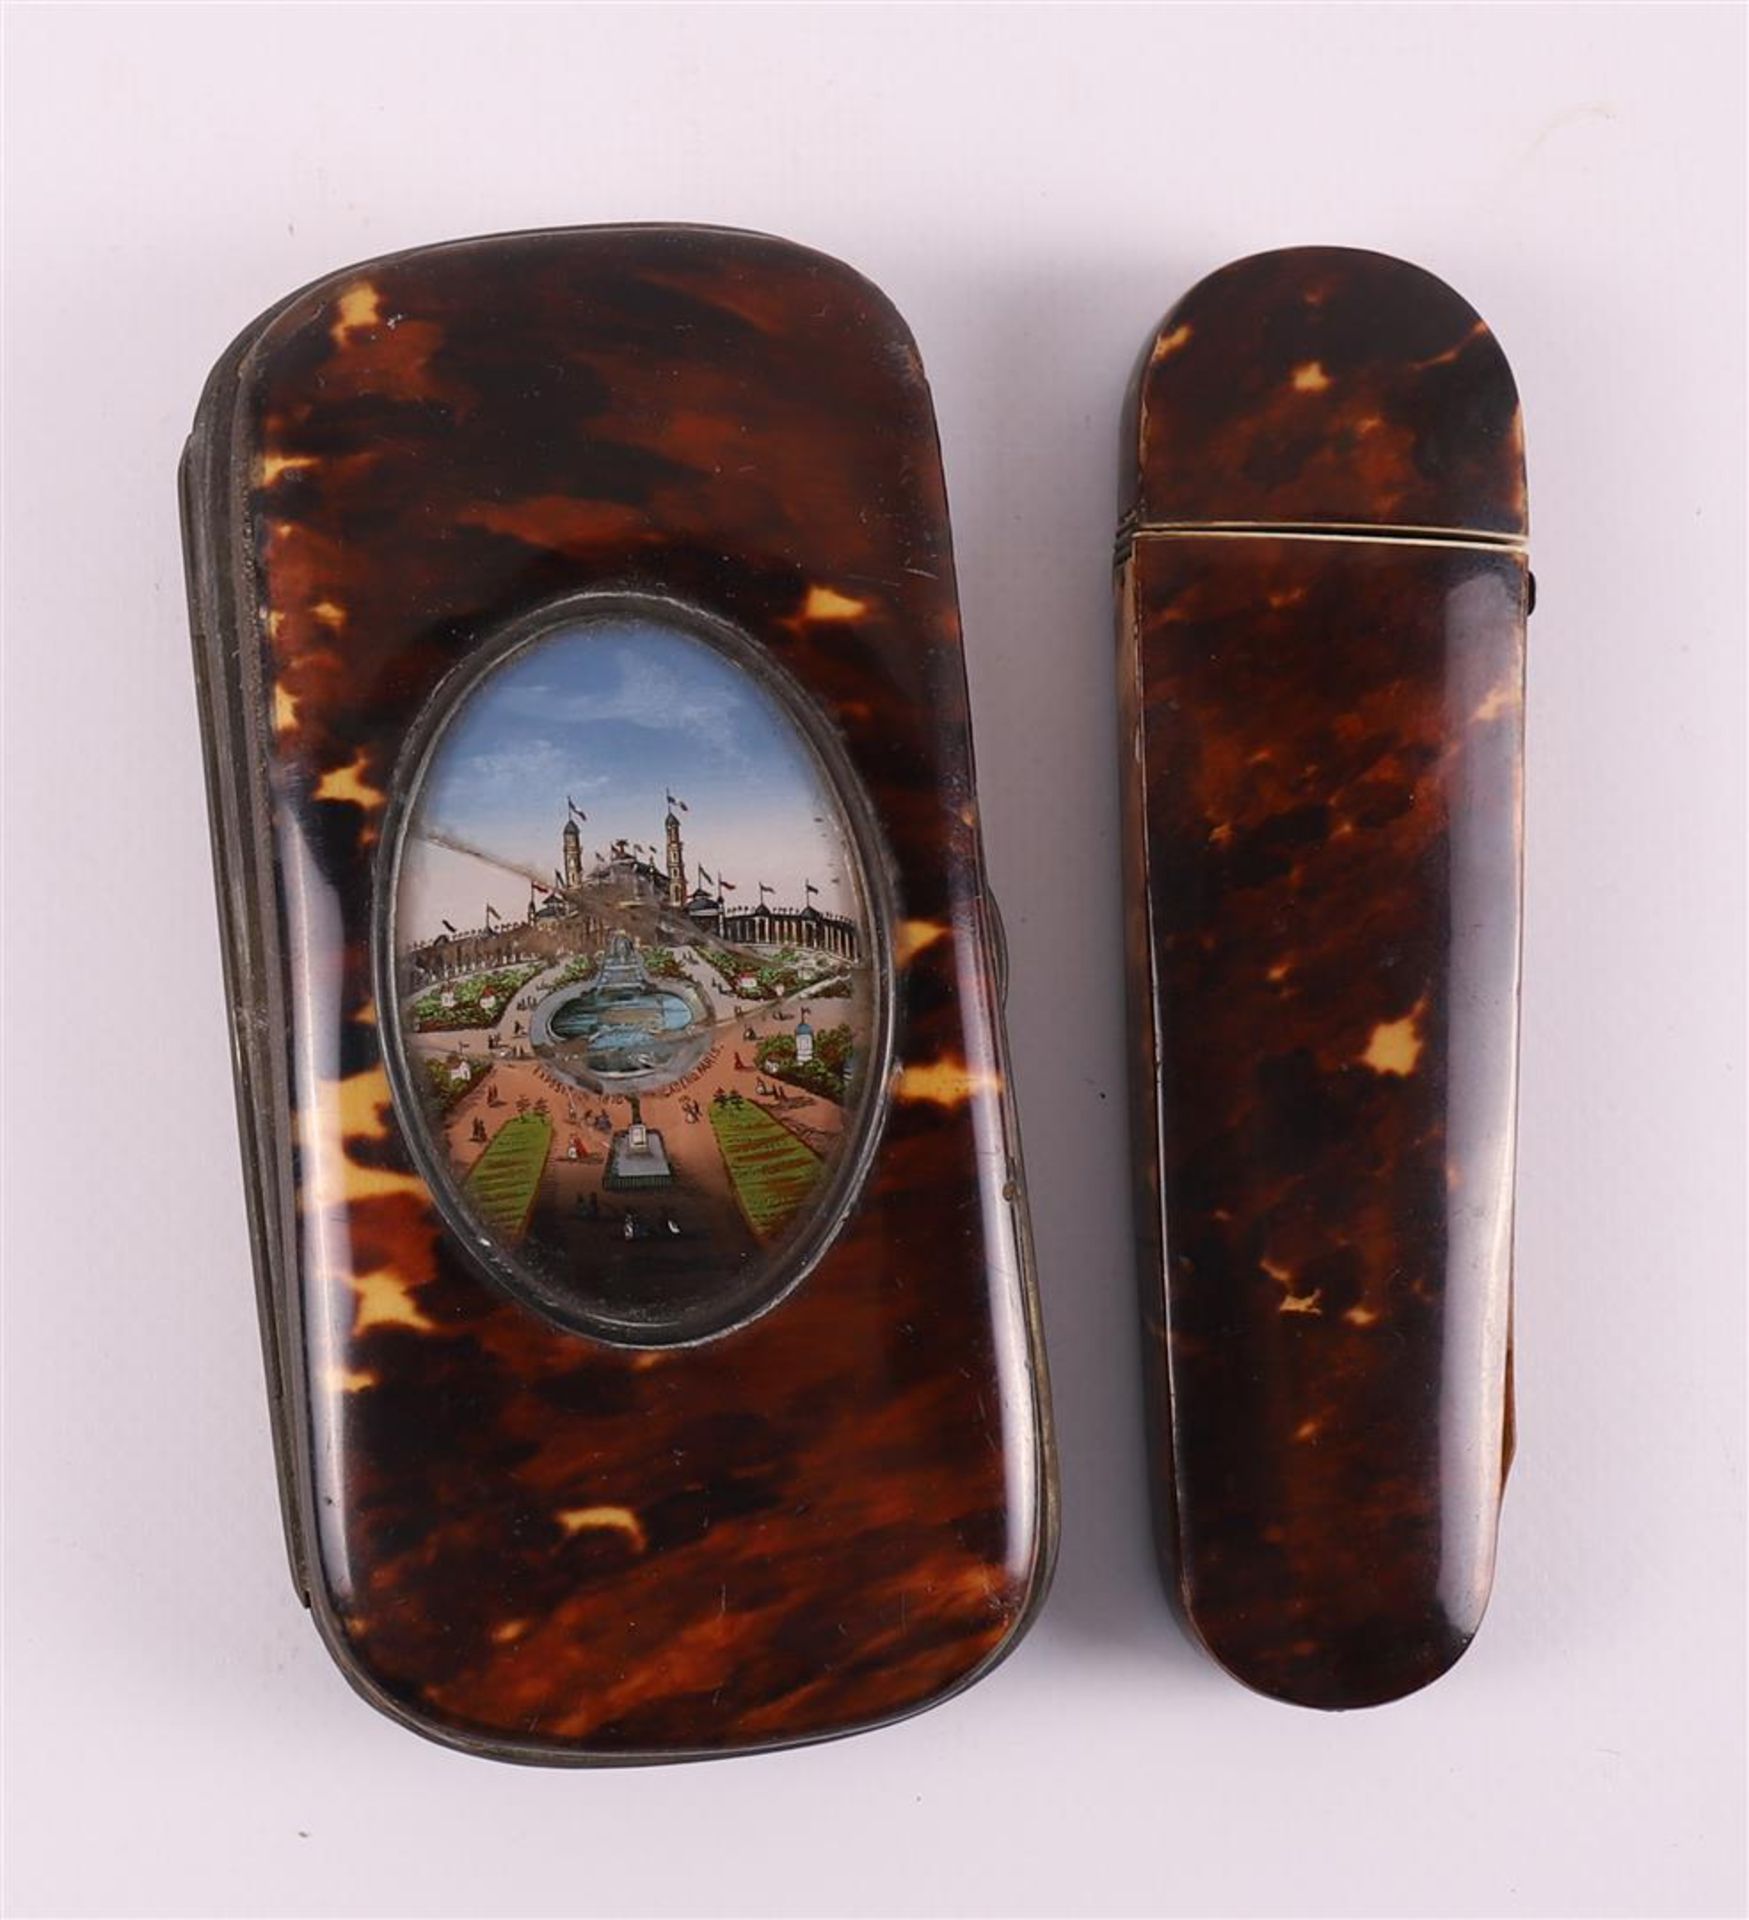 A tortoiseshell glasses case and cigar case, around 1900.